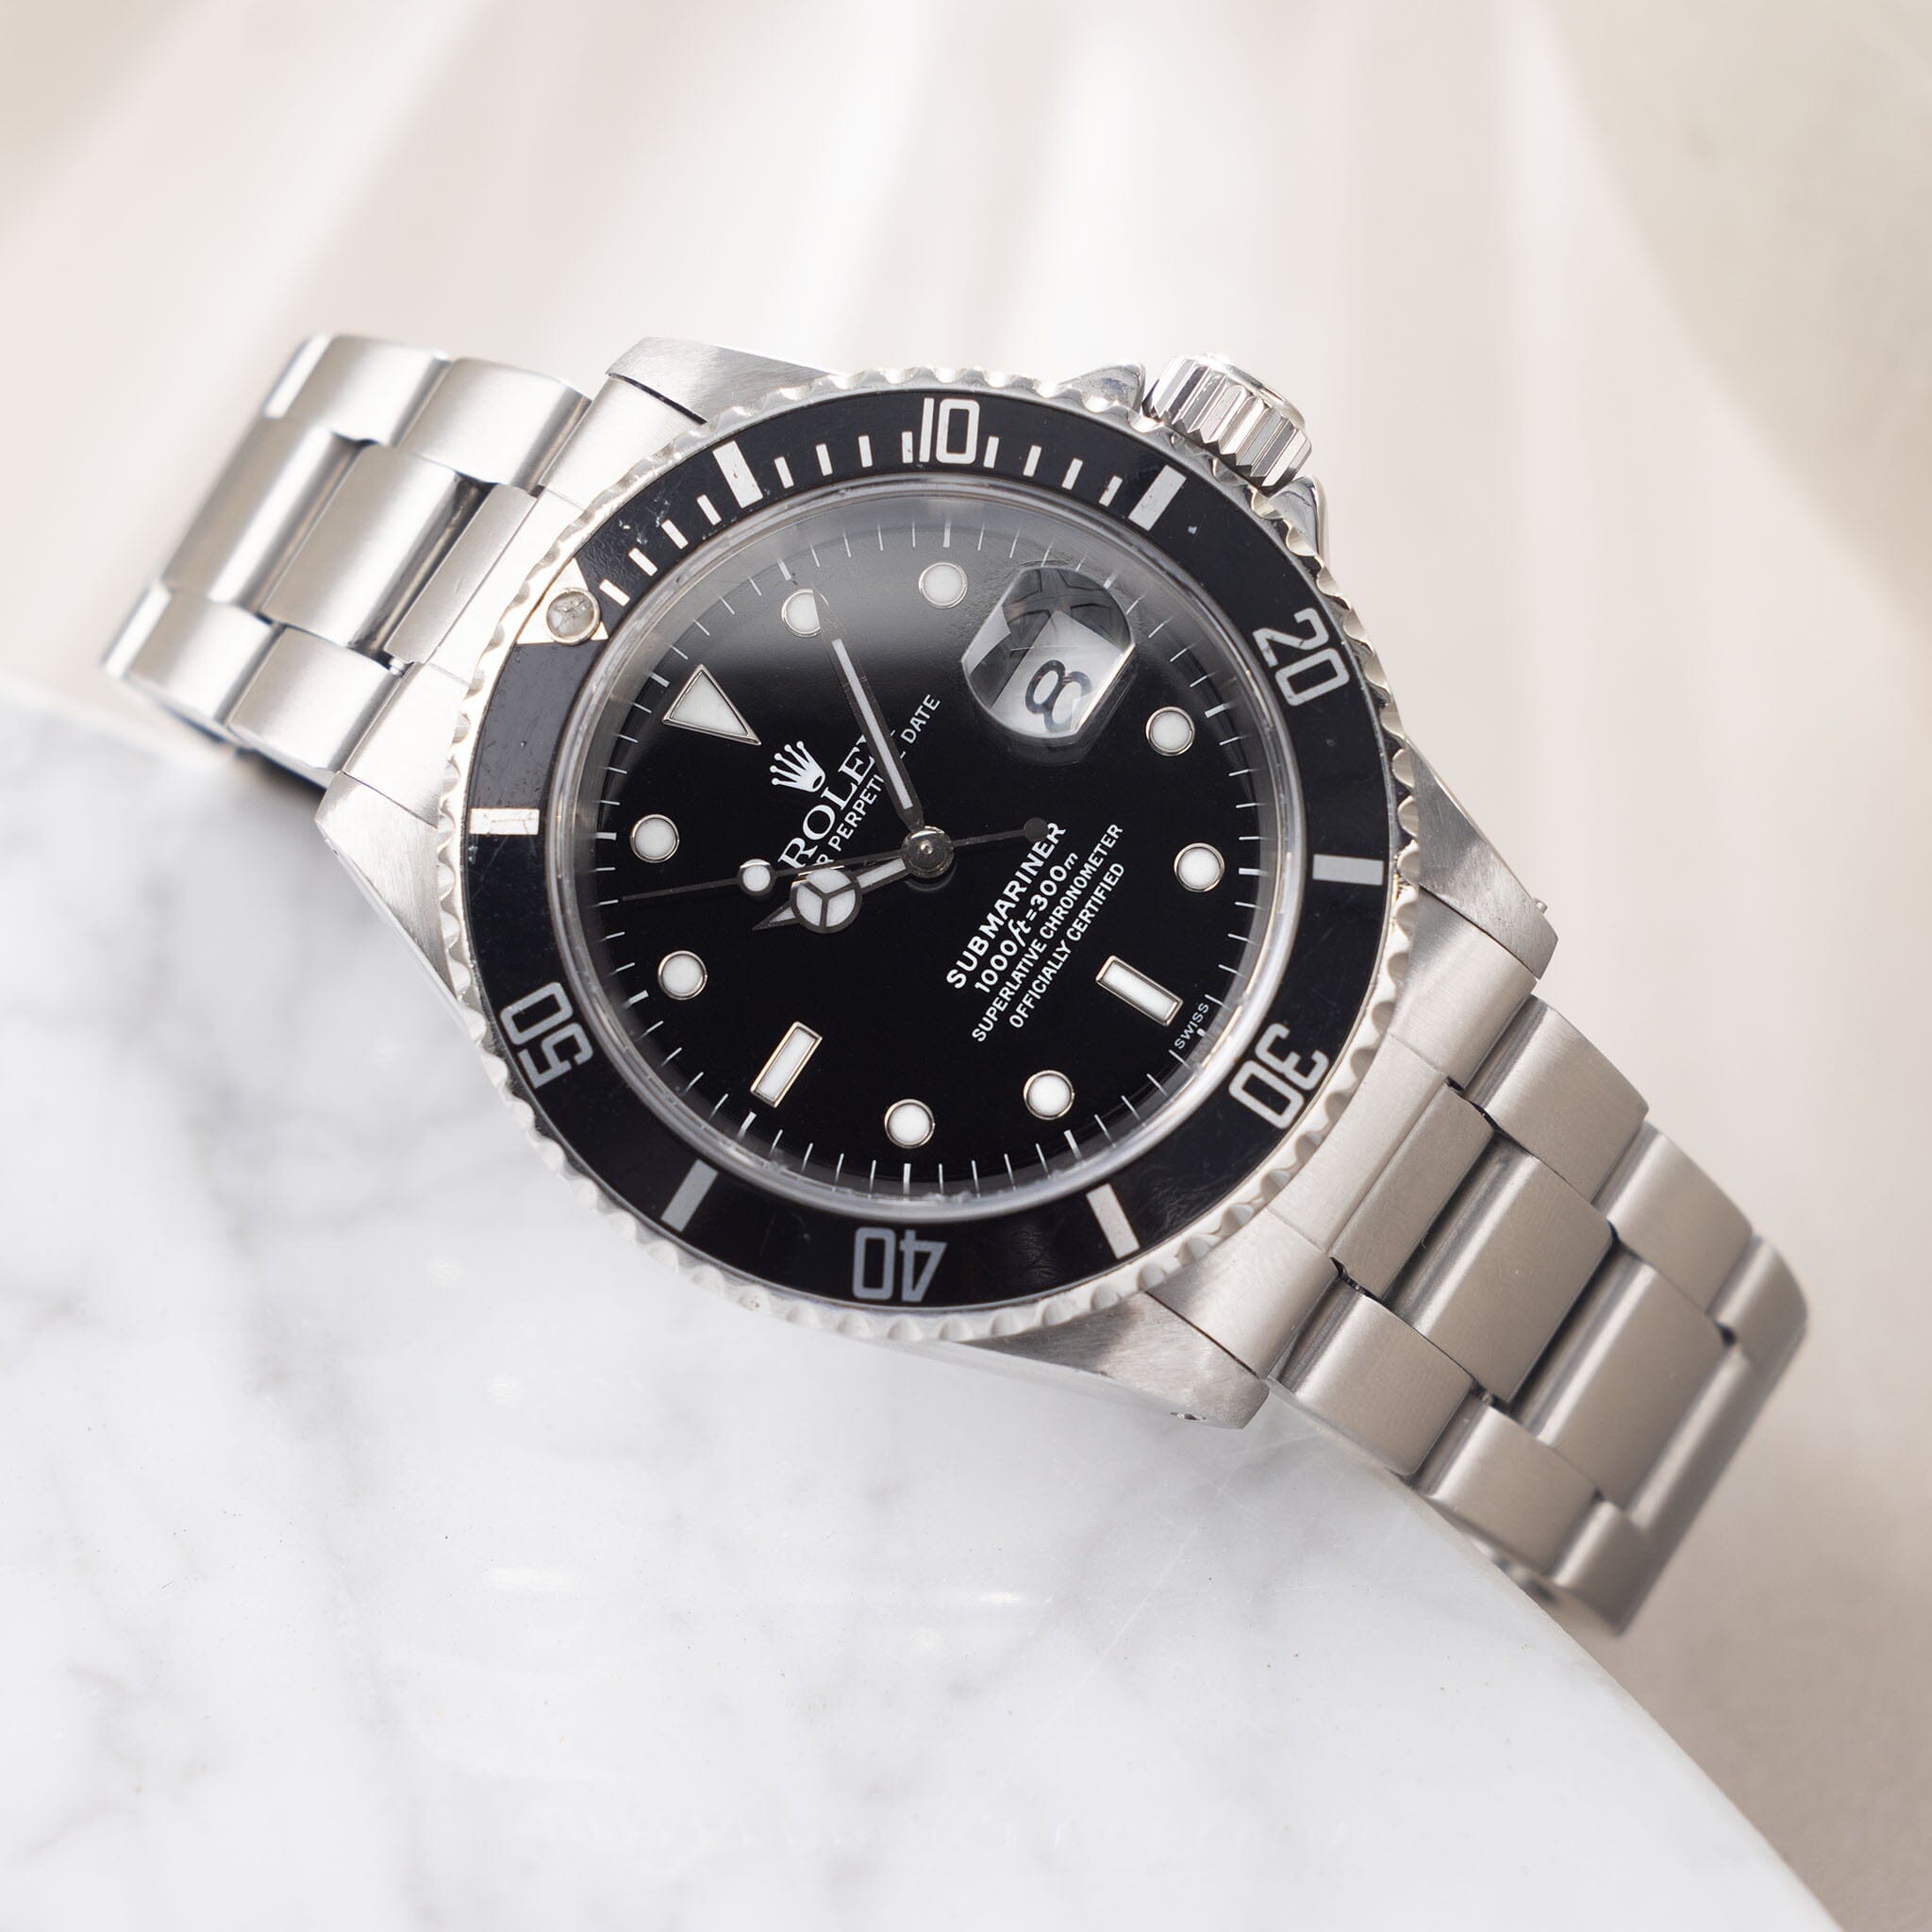 Rolex Submariner Date Swiss Only Dial Ref 16610